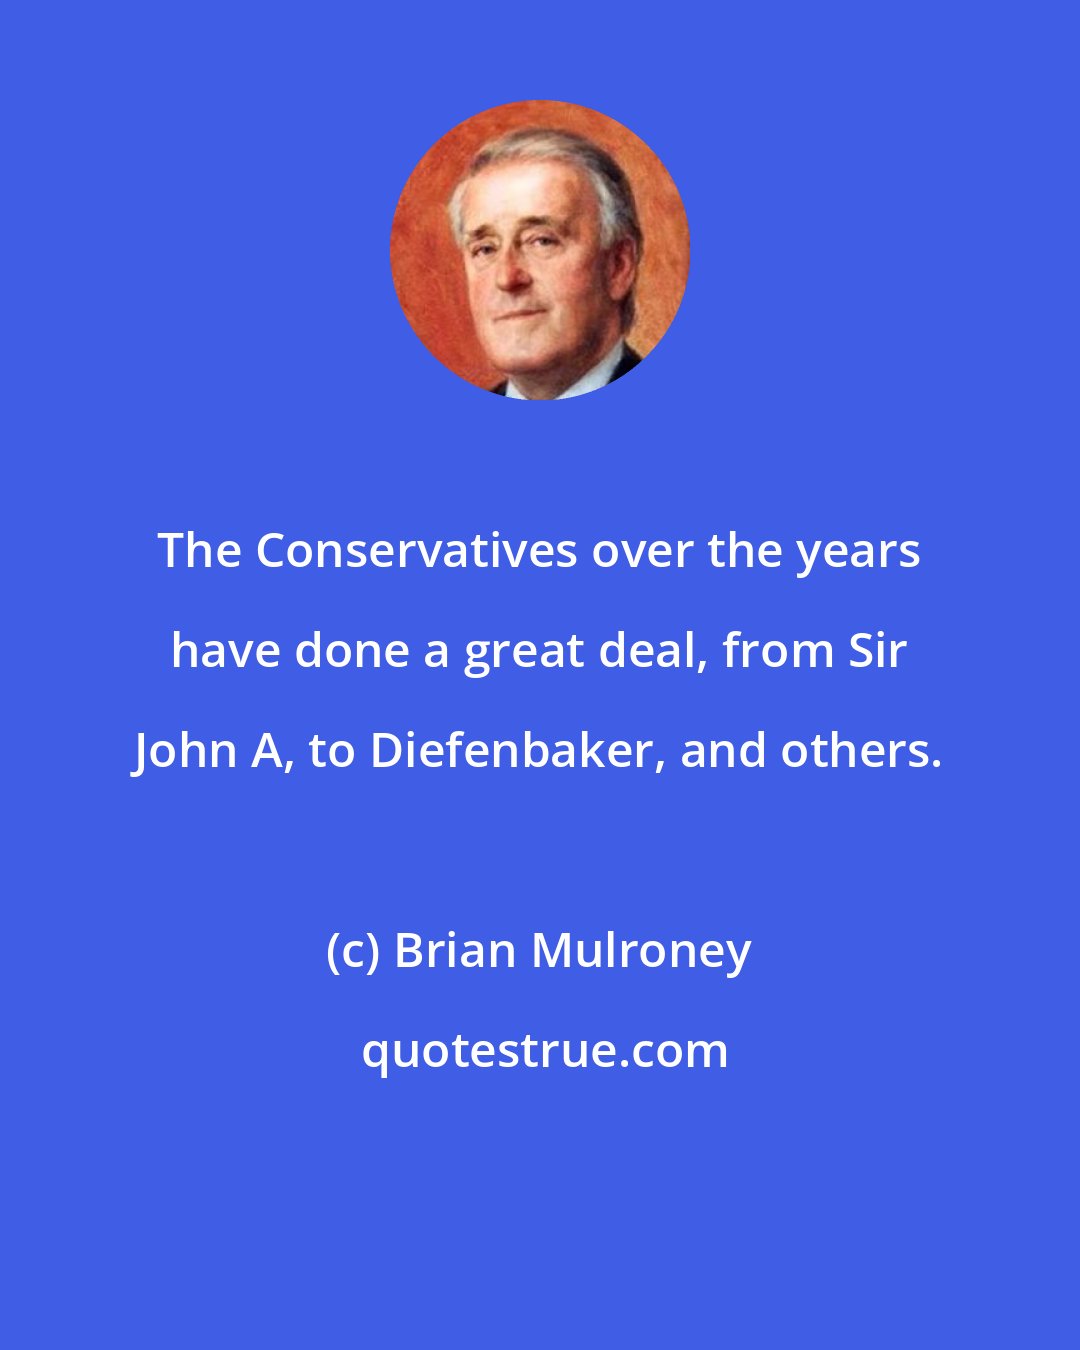 Brian Mulroney: The Conservatives over the years have done a great deal, from Sir John A, to Diefenbaker, and others.